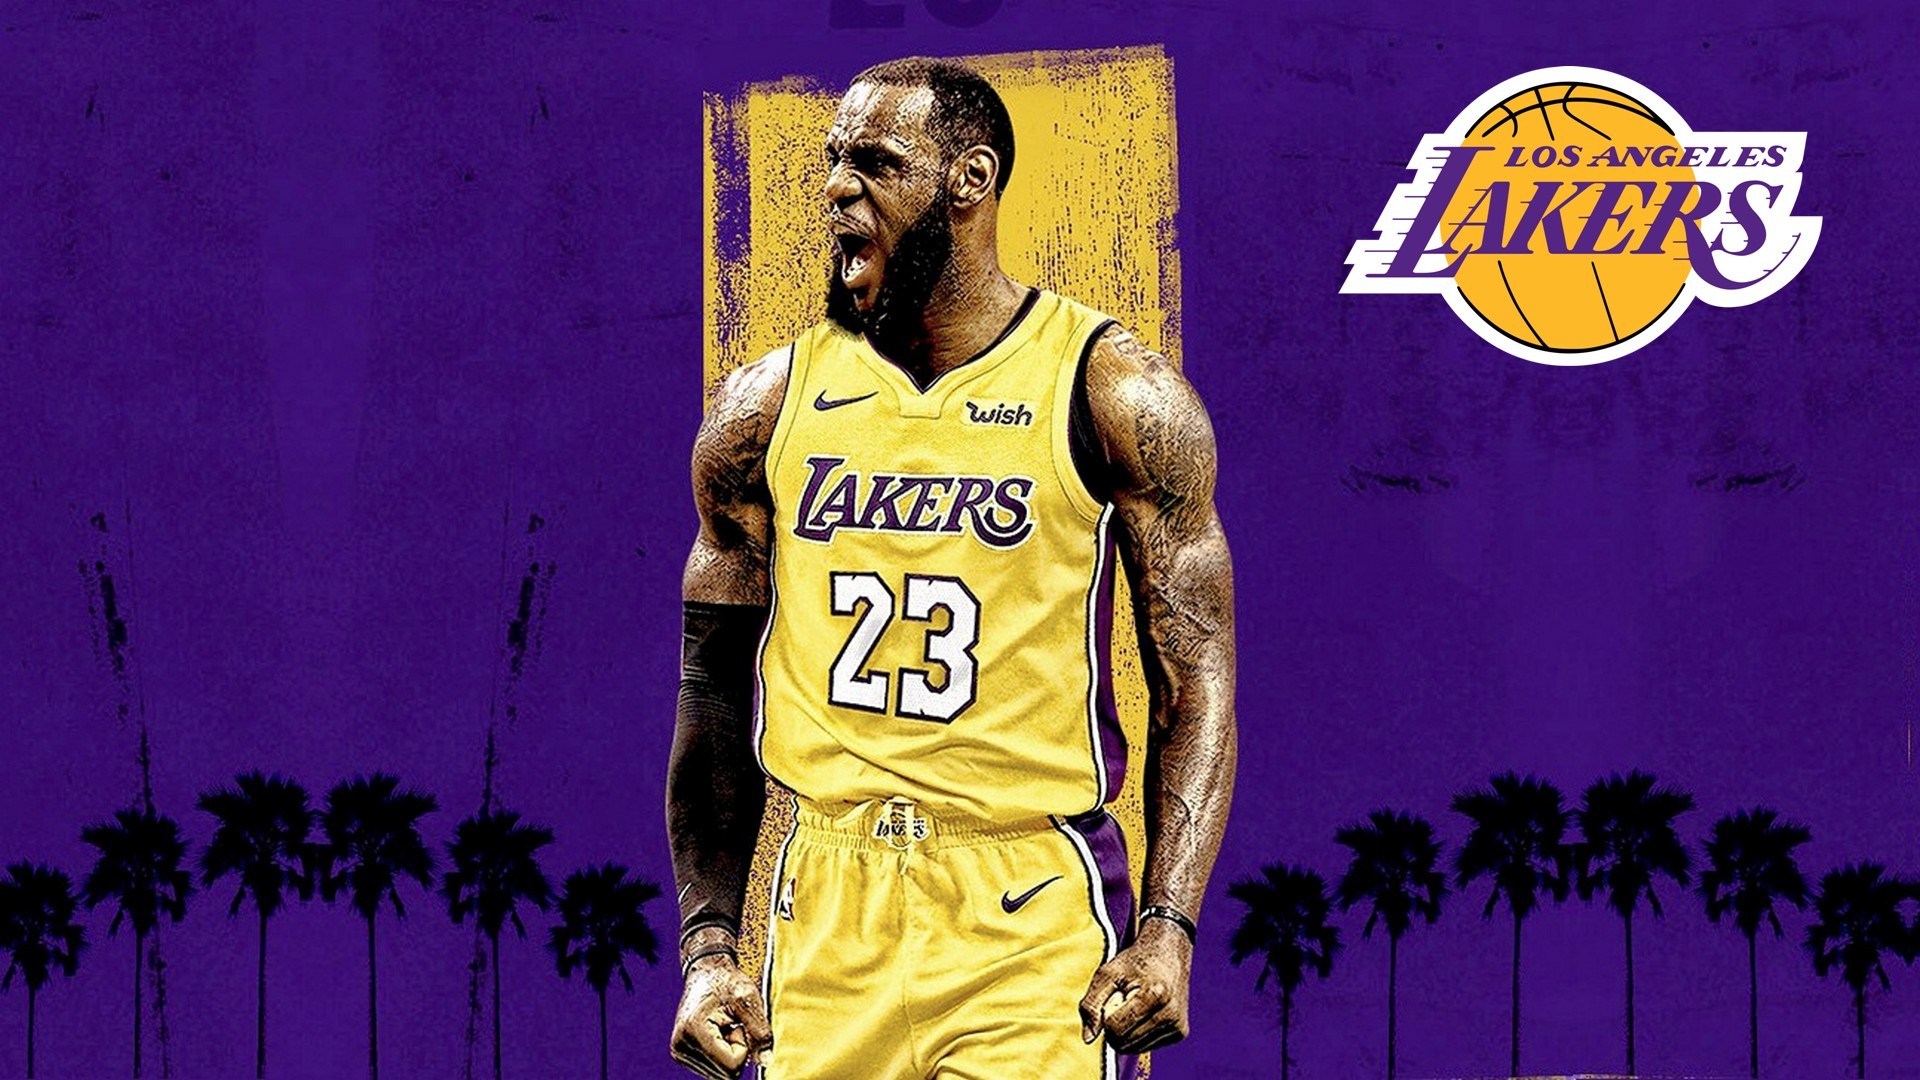 1920x1080 LeBron James Lakers Desktop Wallpapers with image dimensions   pixel. You can make this wallpaper